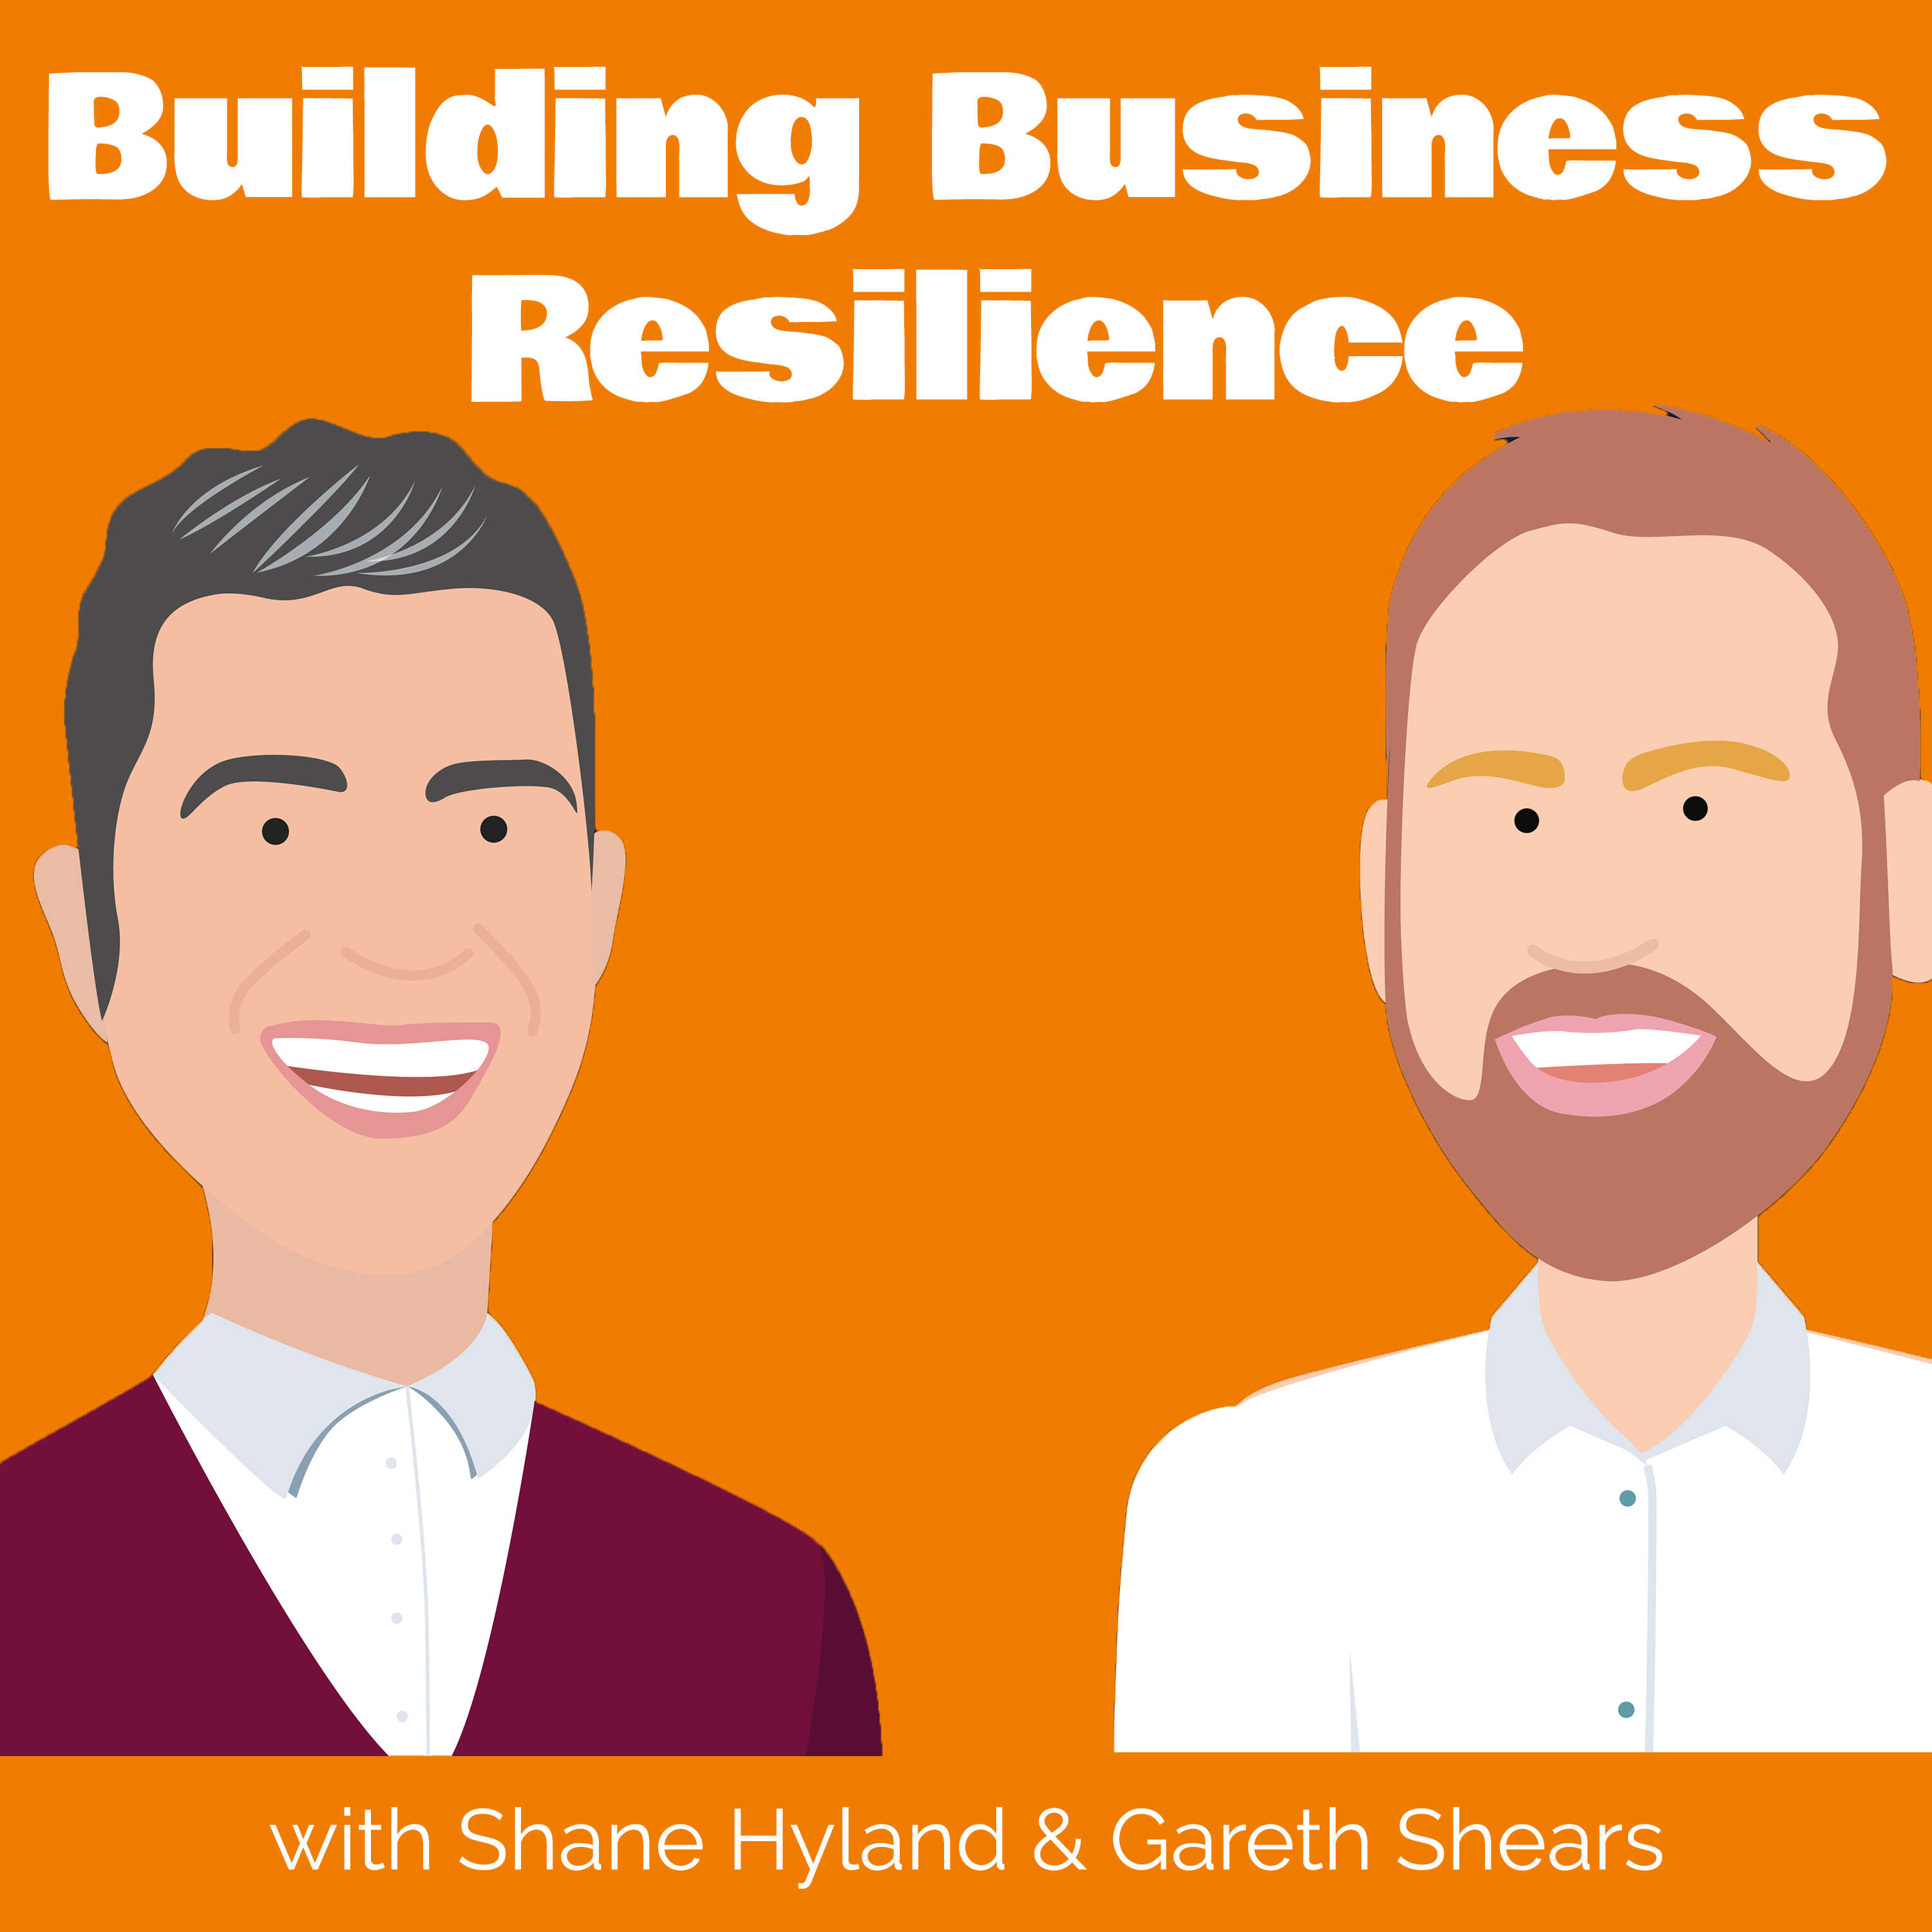 Building Business Resilience